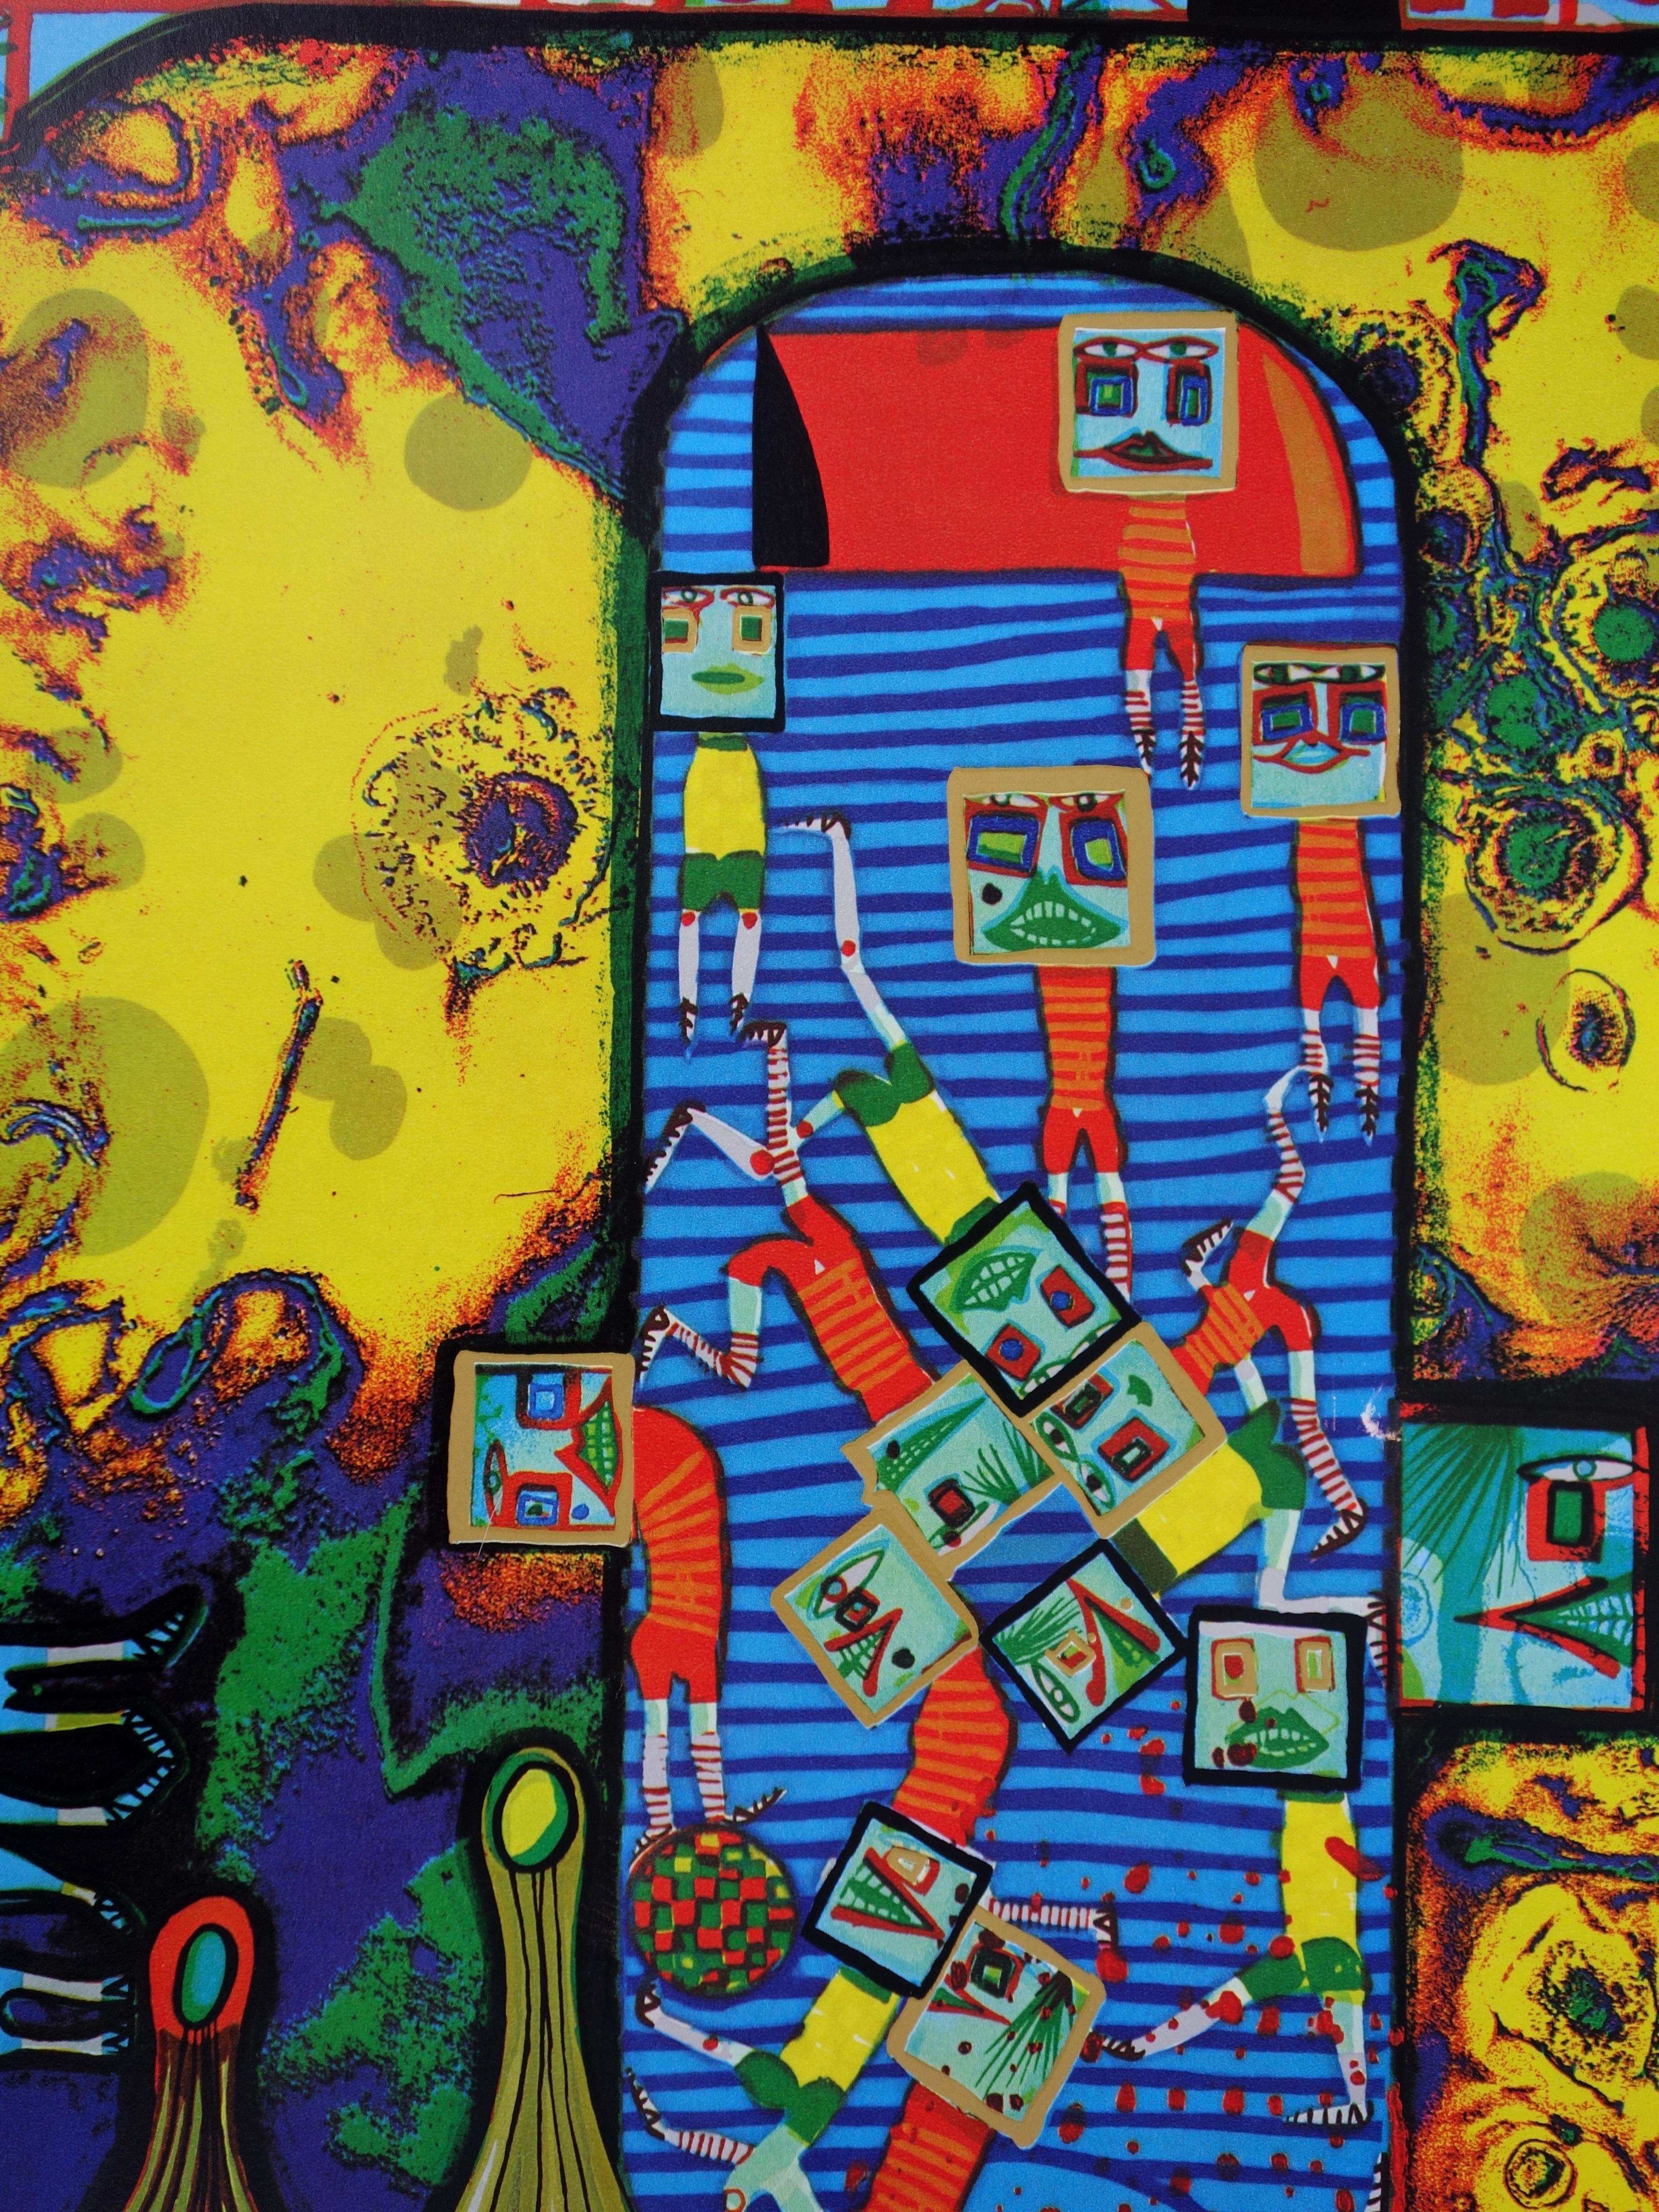 Olympiade - Lithograph (Olympic Games Munich 1972) - Black Abstract Print by Friedensreich Hundertwasser